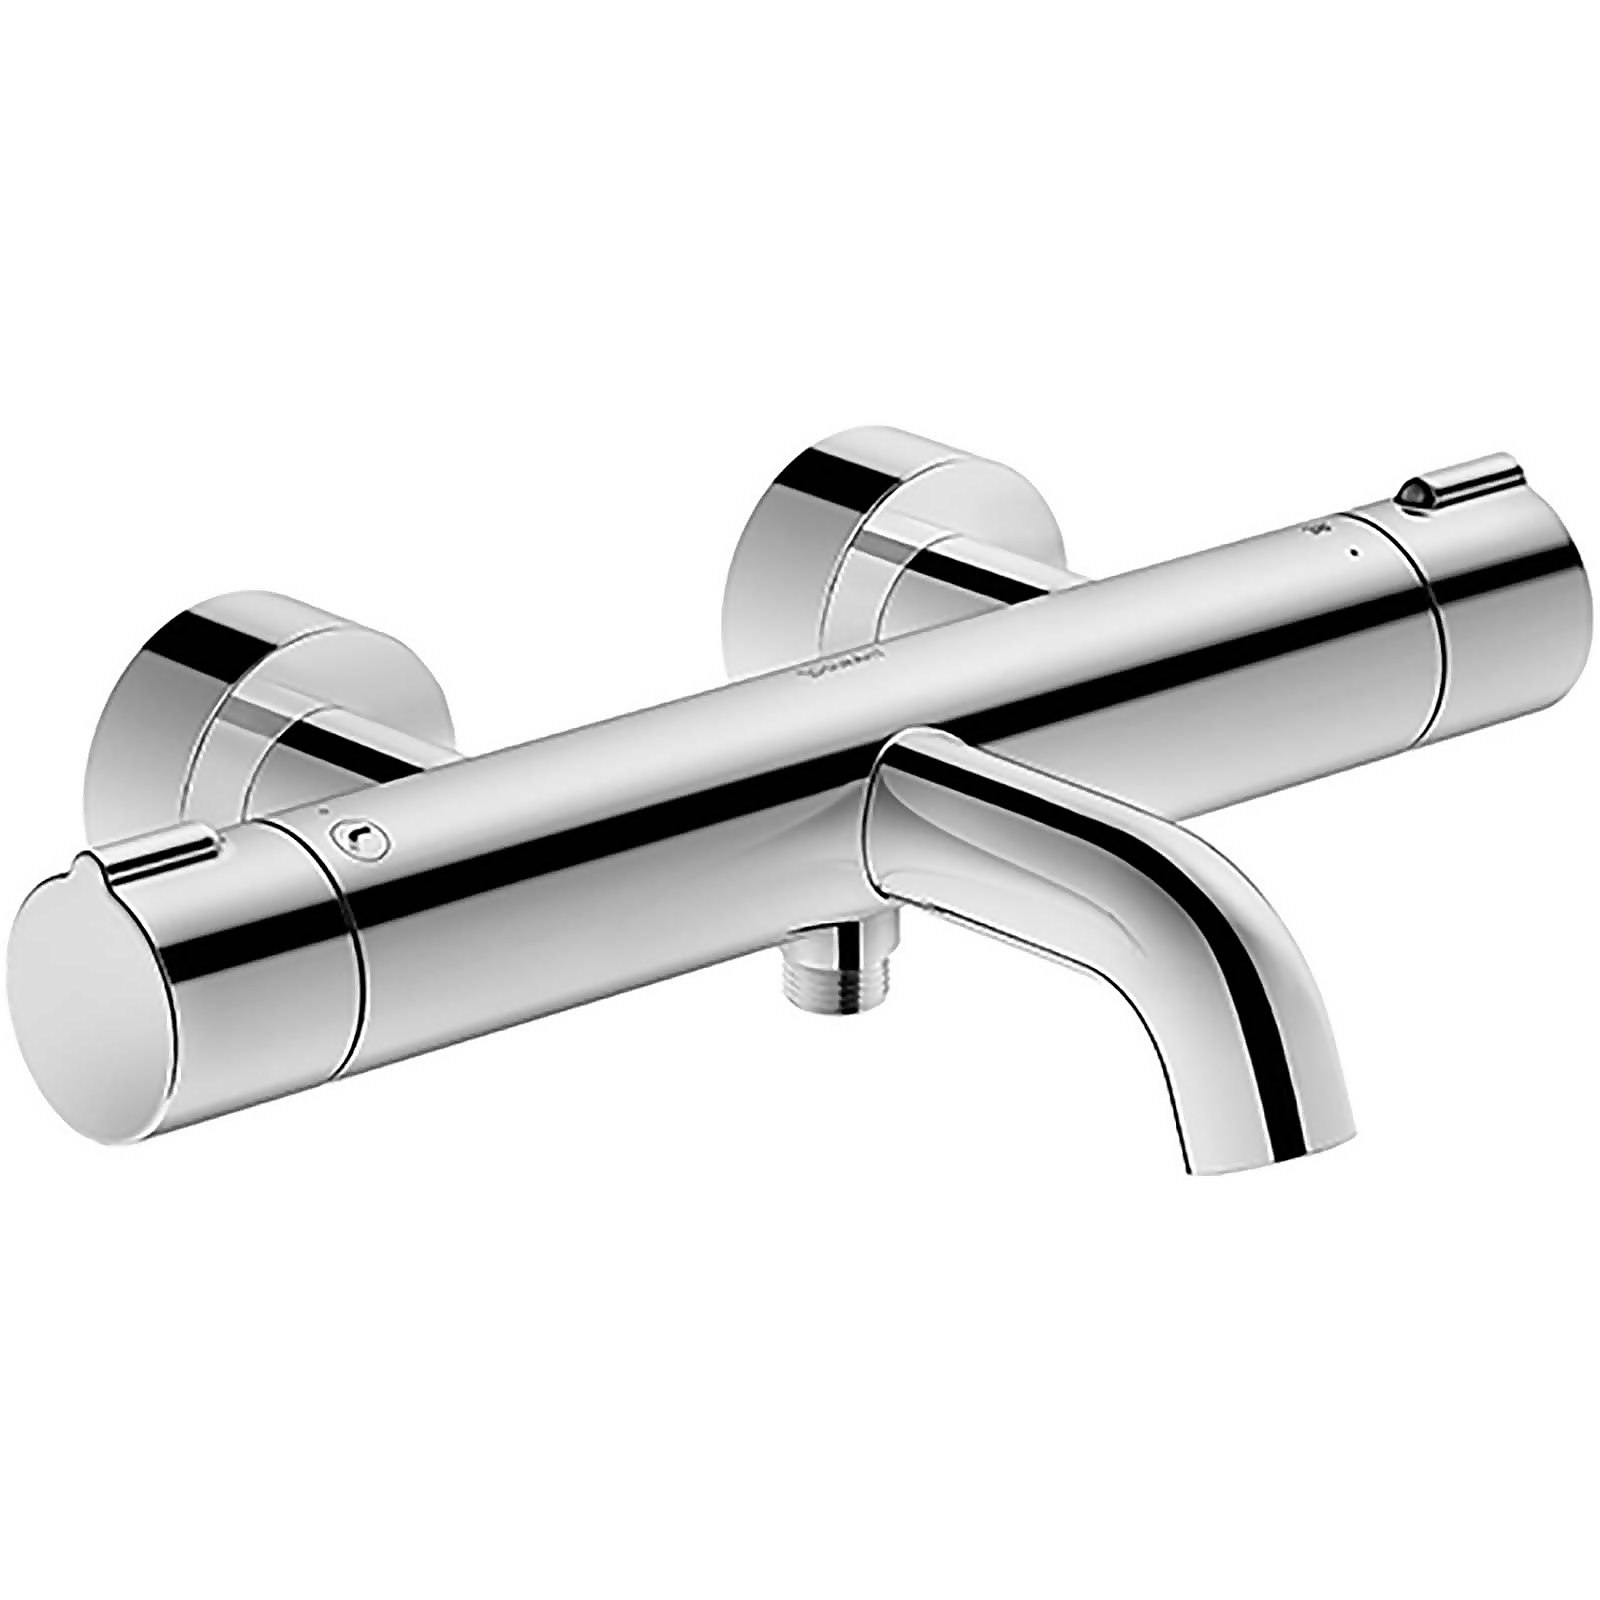 Photo of Duravit C.1 Thermostatic Bath Mixer Tap For Exposed Installation